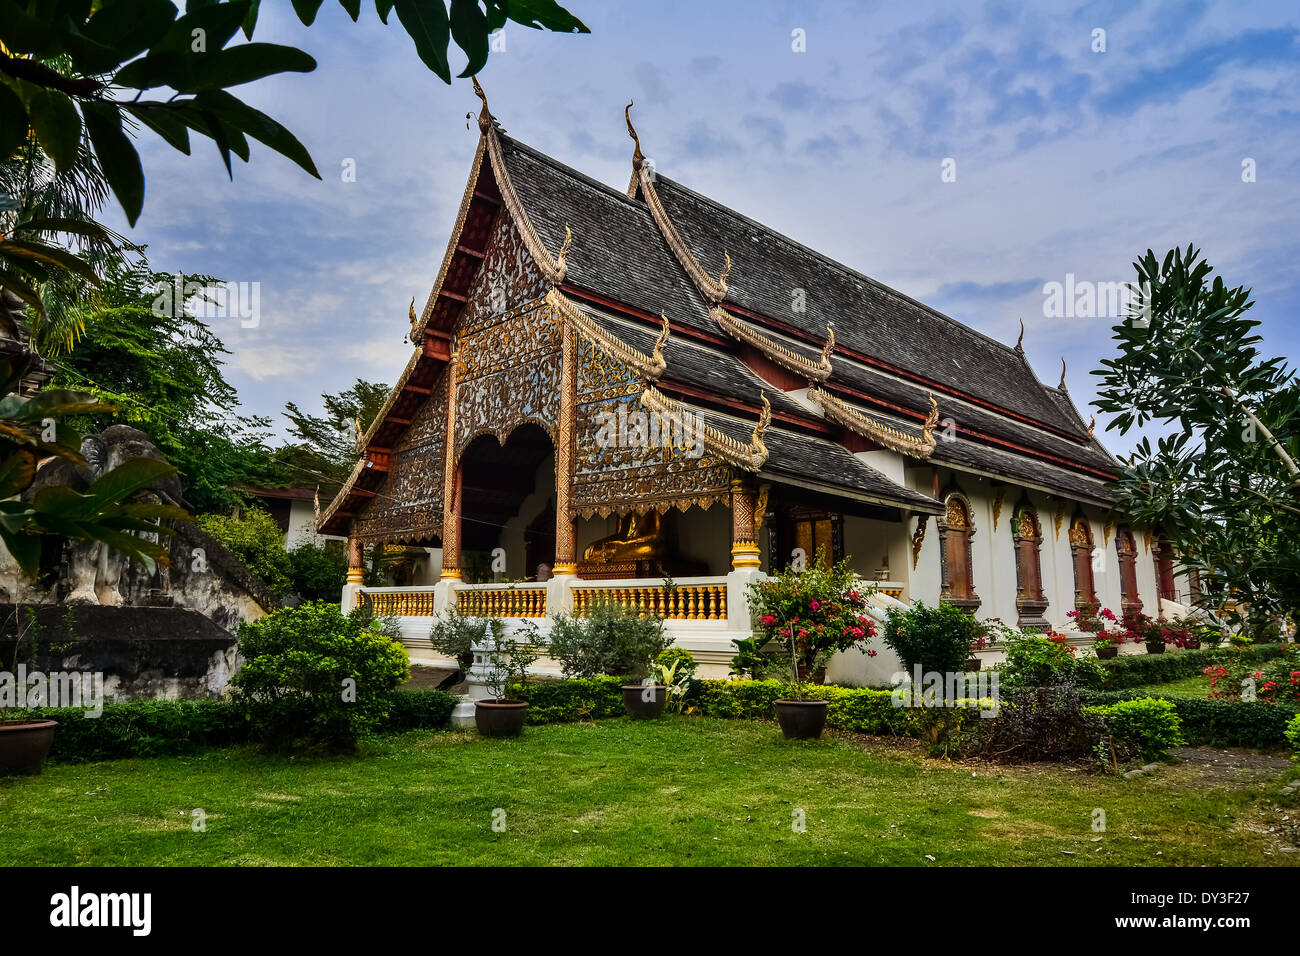 Ancient temple, Wat Chiang Man temple in Chiang Mai, Thailand. Important attractions. Stock Photo